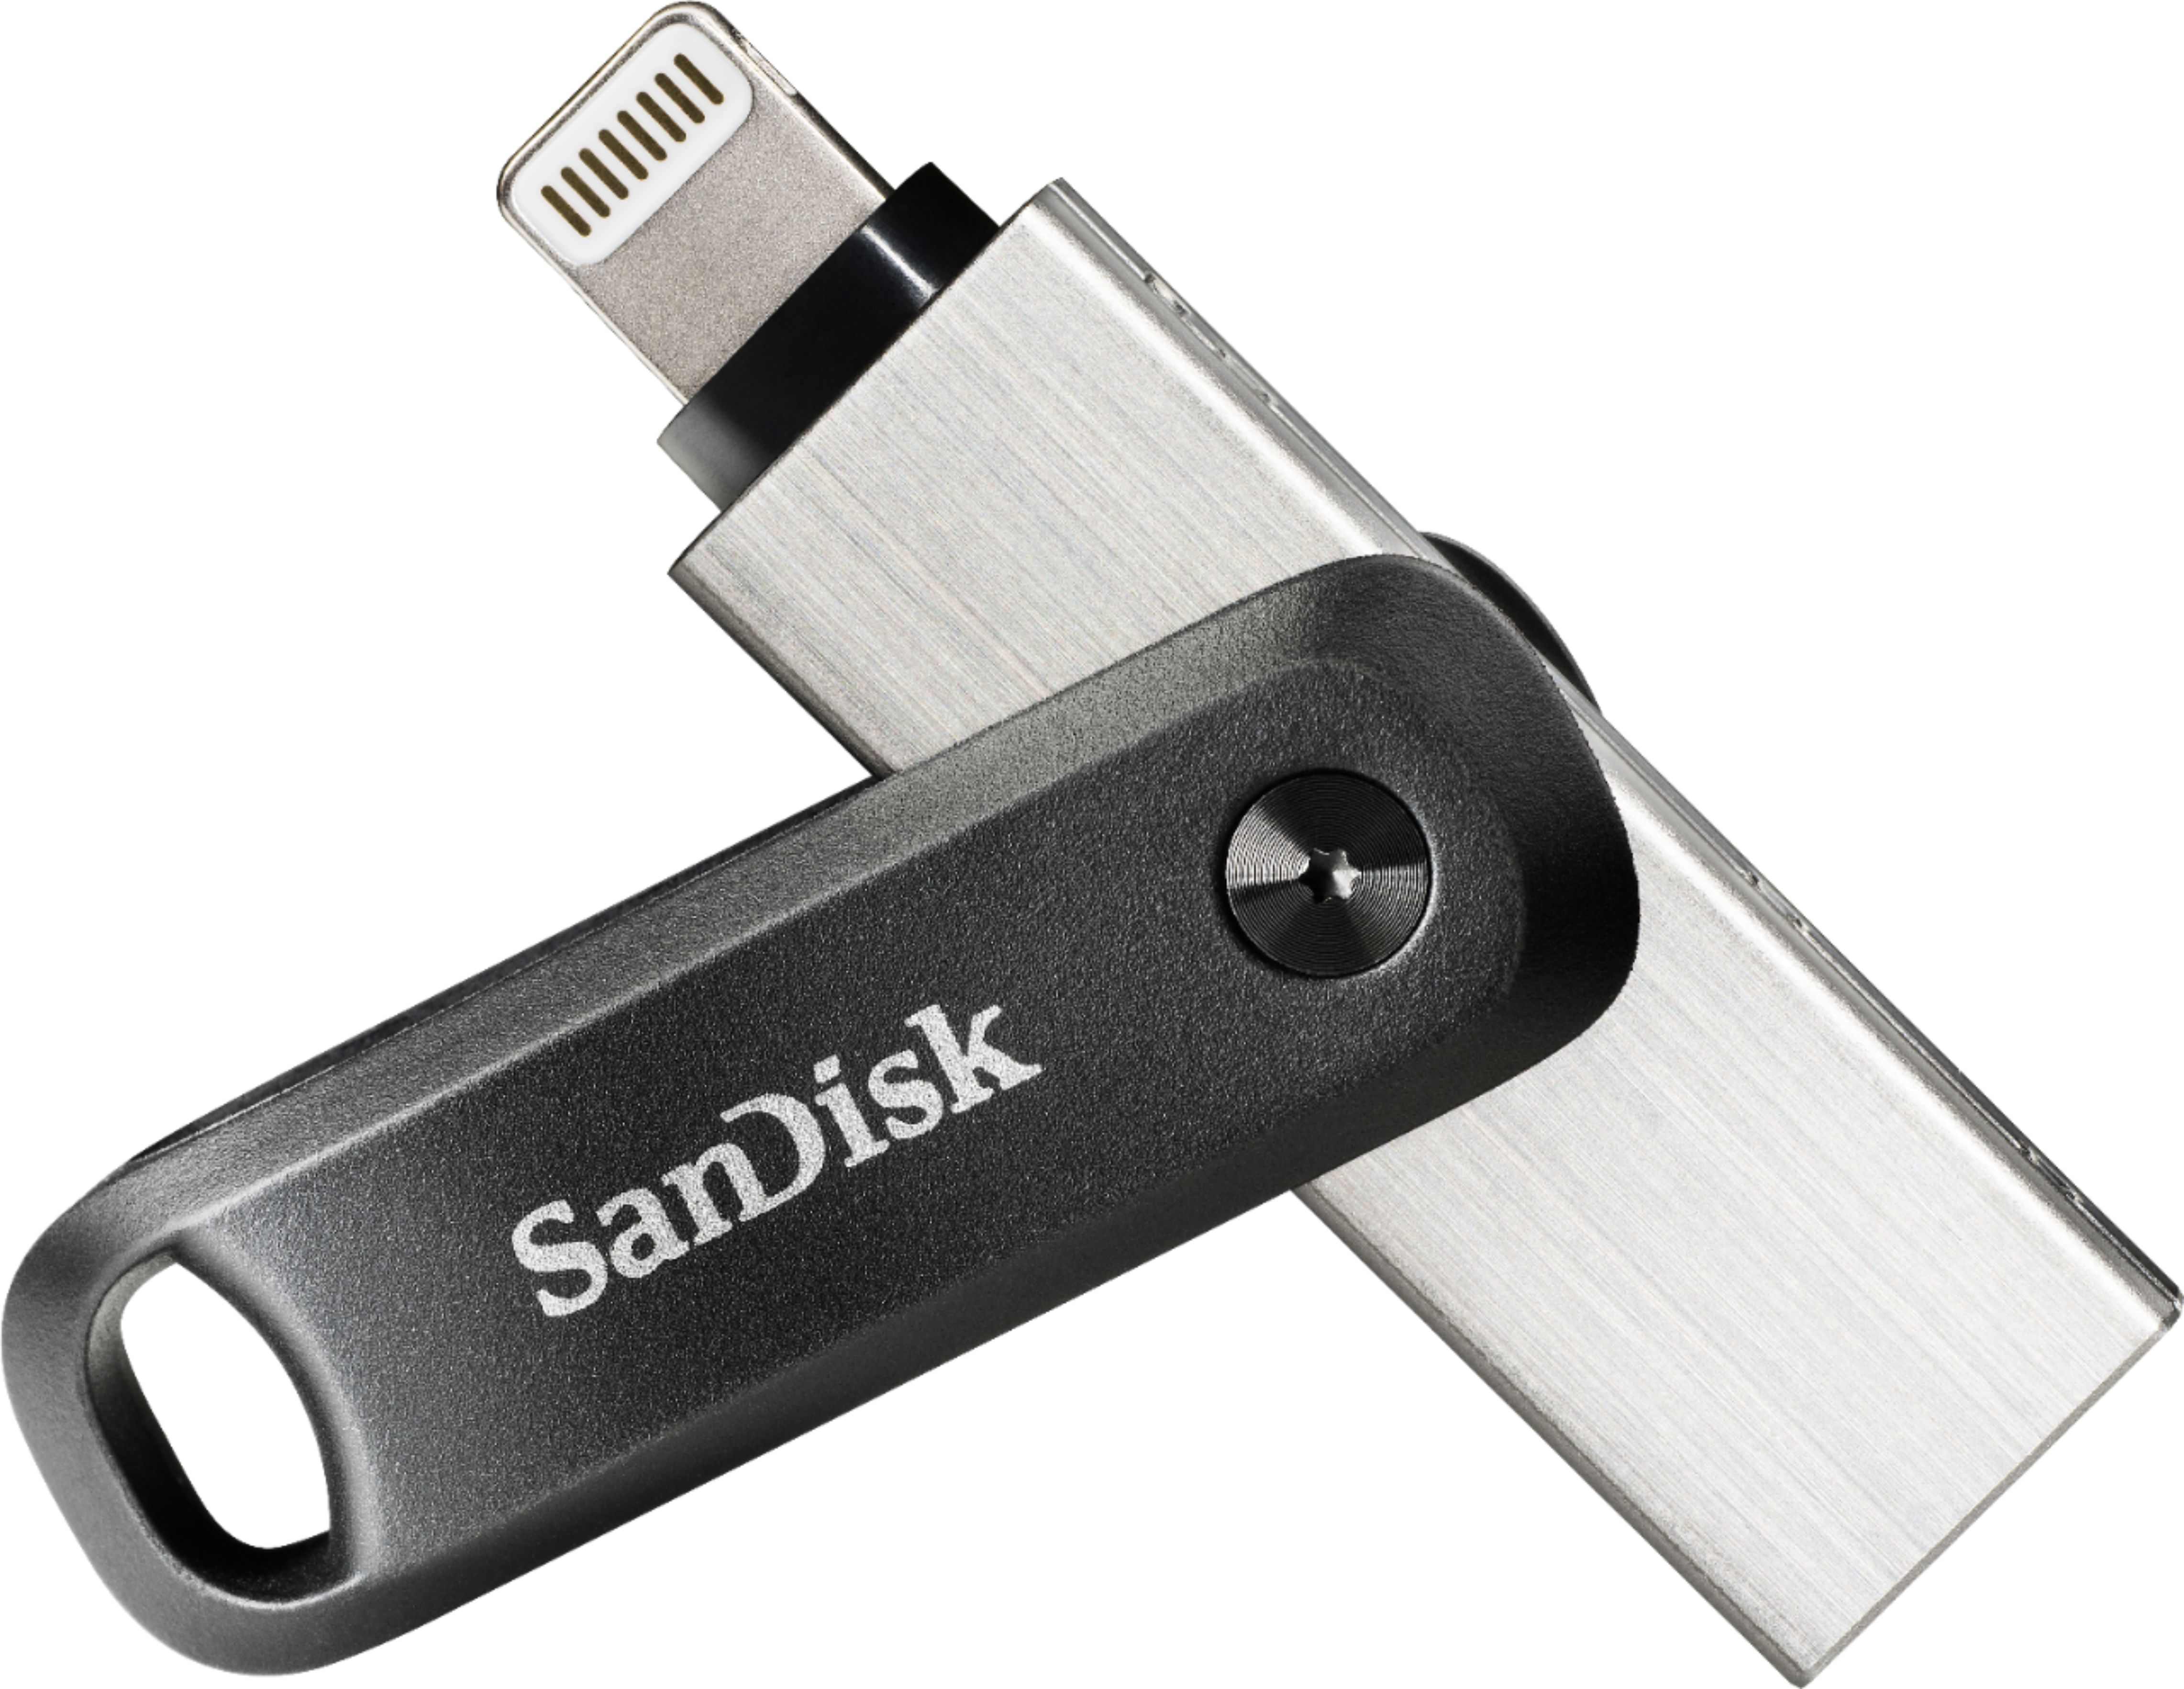 SanDisk iXpand Flash Drive Go USB 3.0 Type-A to Lightning for iPhone & iPad Black / Silver SDIX60N-256G-AN6NE Best Buy